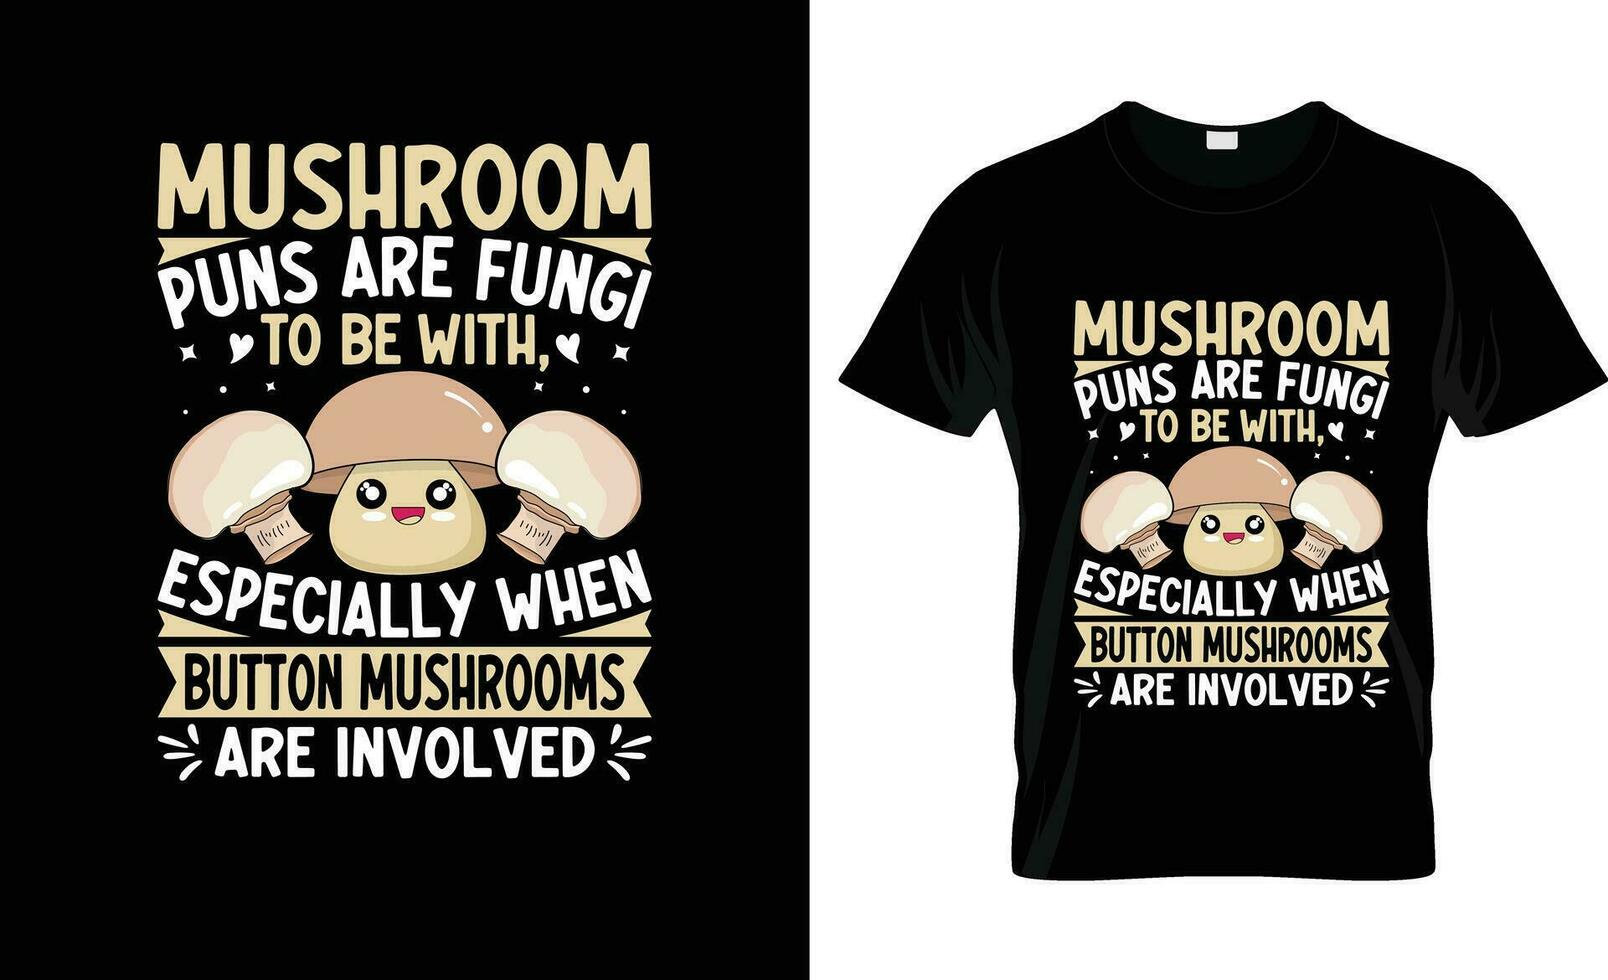 Button Mushrooms The Tiny Treasures Of The colorful Graphic T-Shirt,t-shirt print mockup vector